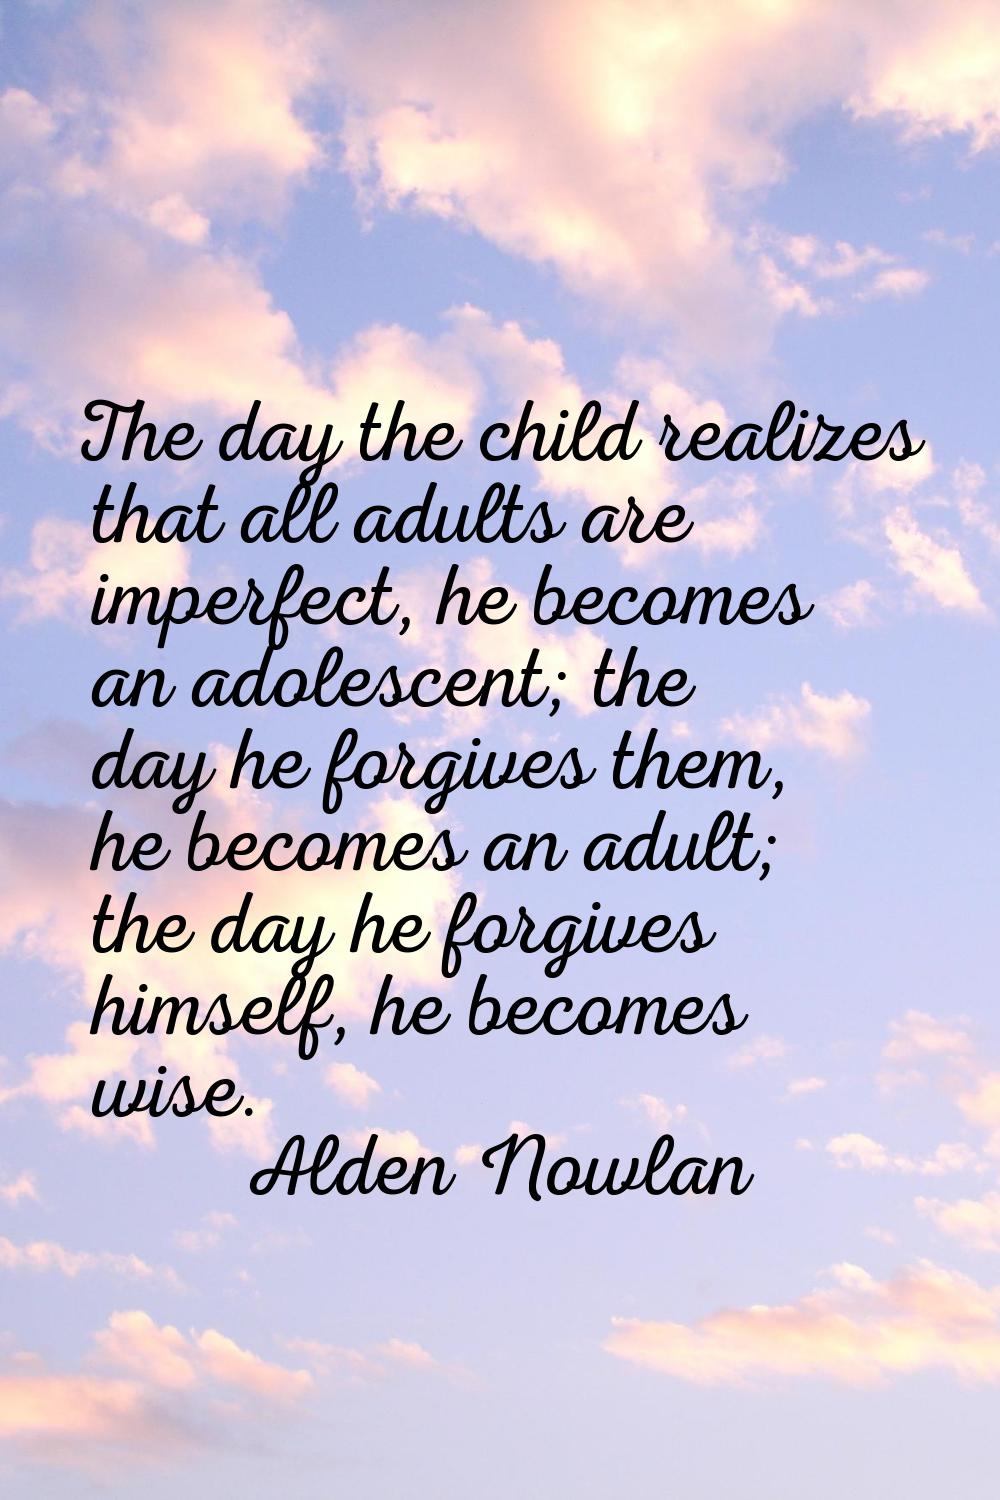 The day the child realizes that all adults are imperfect, he becomes an adolescent; the day he forg